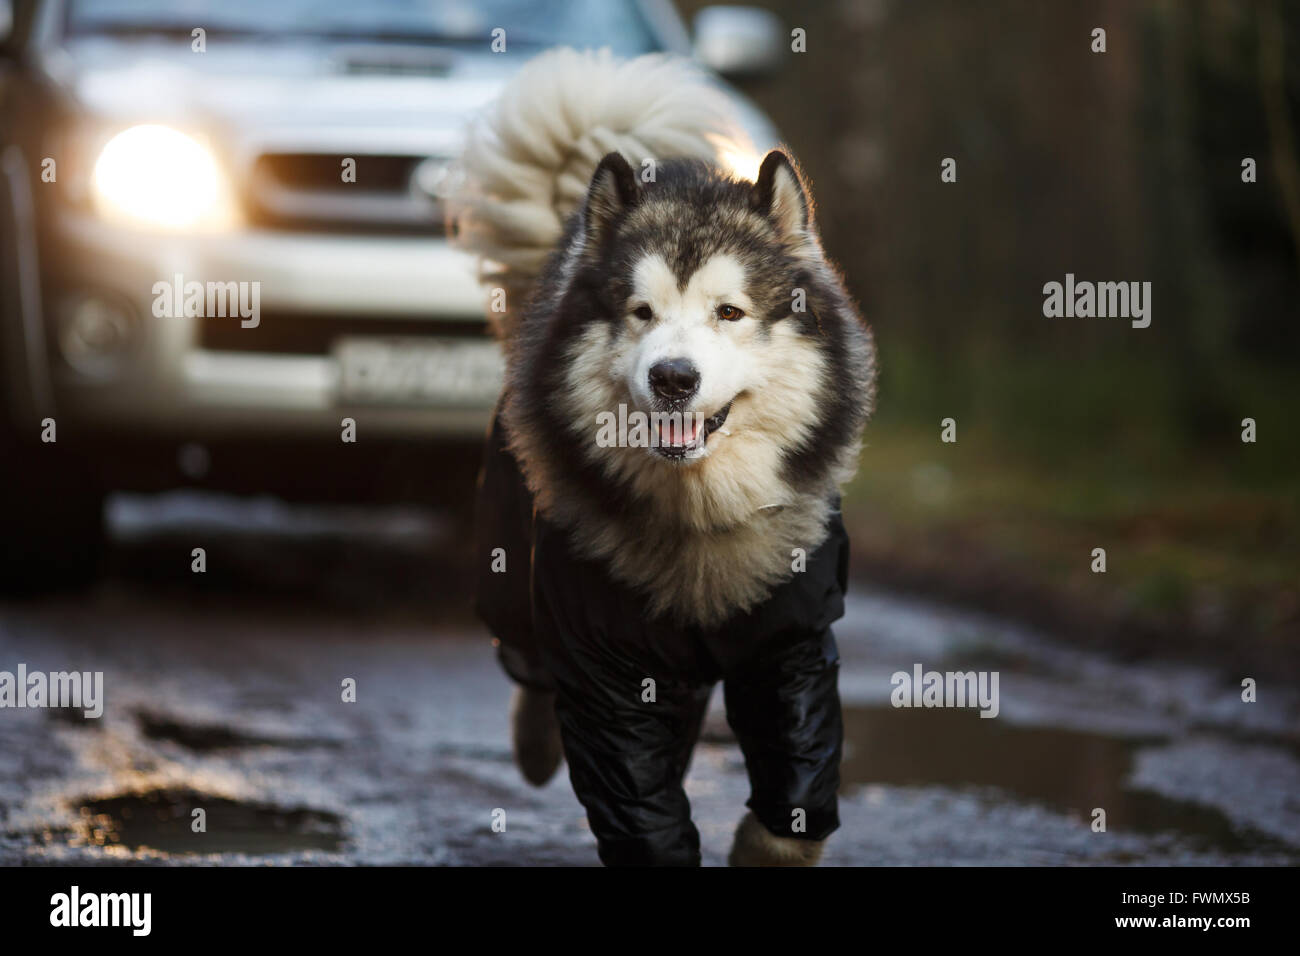 Malamute portrait in front of the machine running at dusk Stock Photo